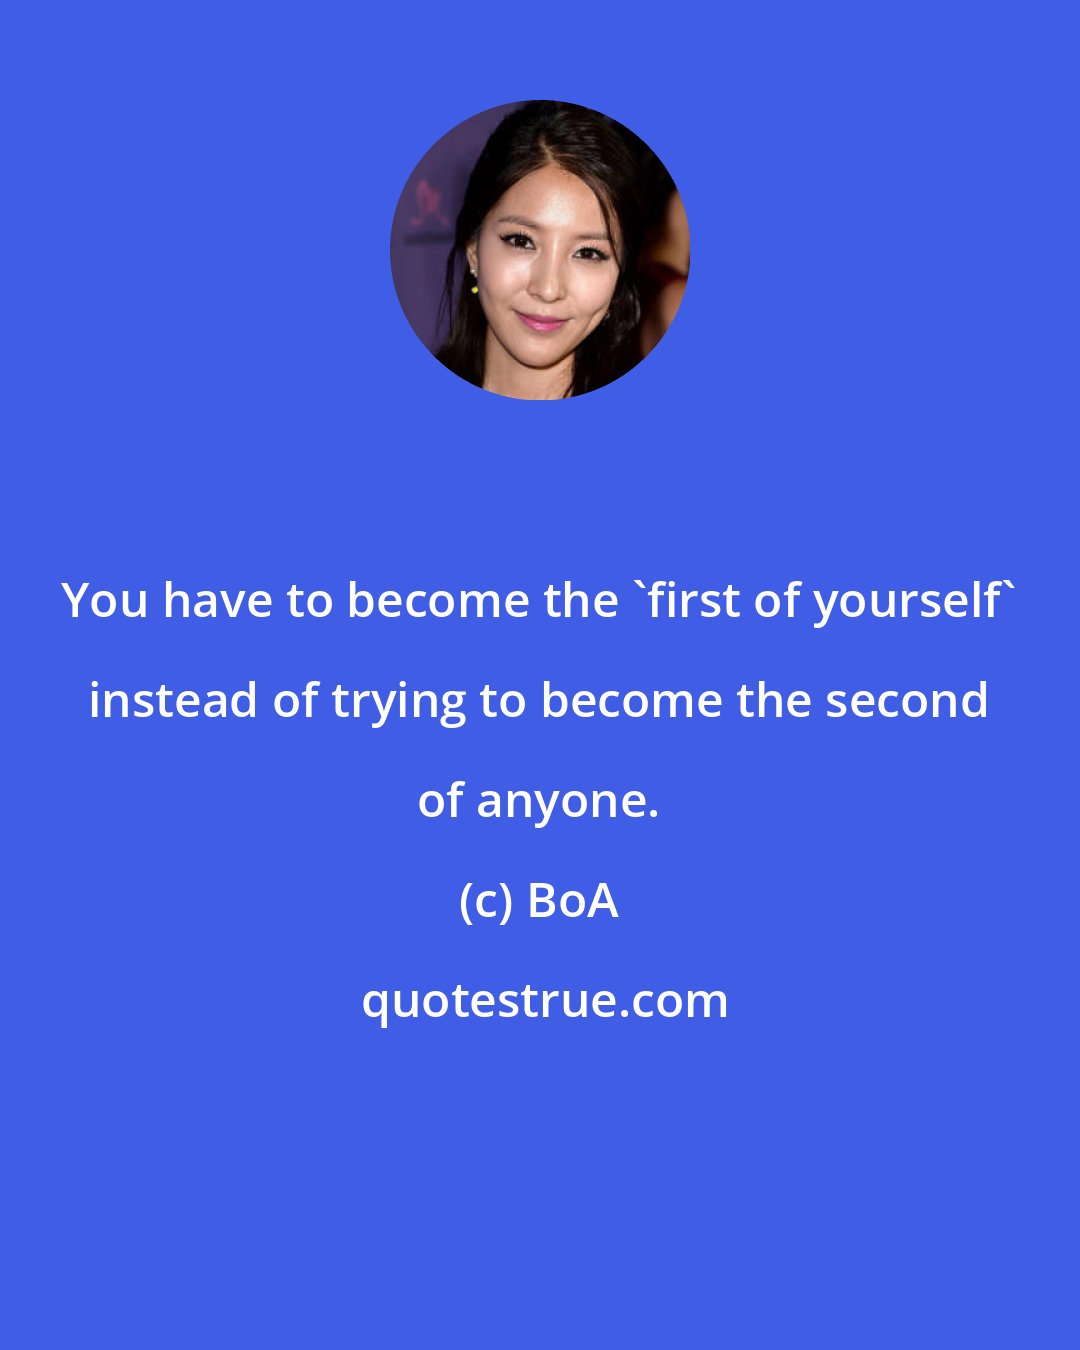 BoA: You have to become the 'first of yourself' instead of trying to become the second of anyone.